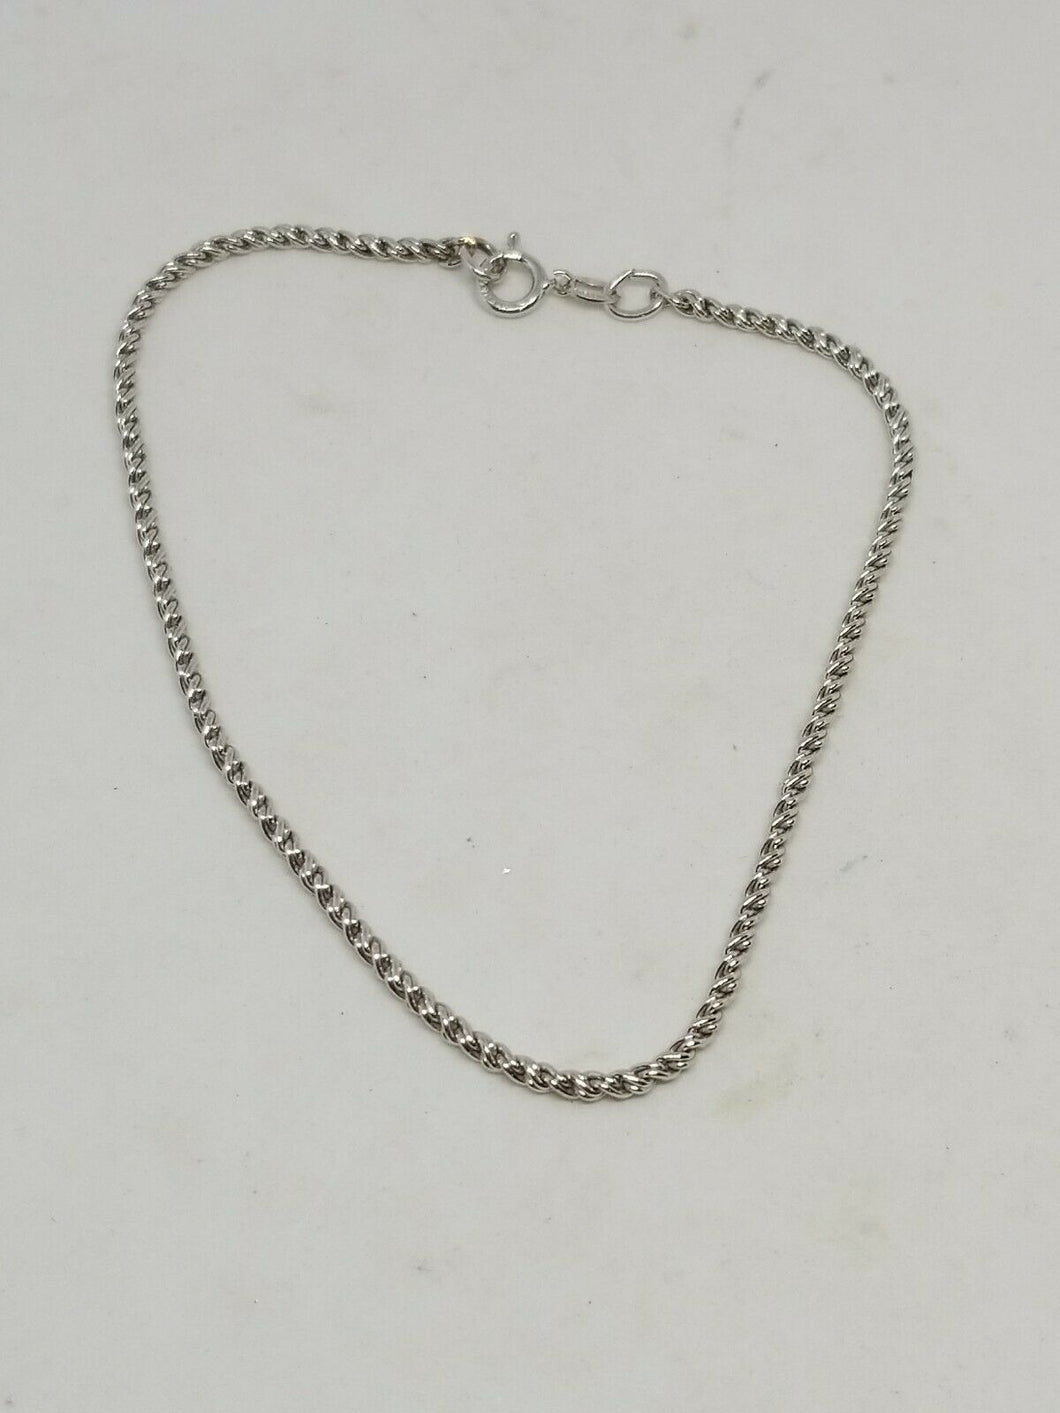 Rhodium Plated Sterling Silver 925 Rope Chain Bracelet 8